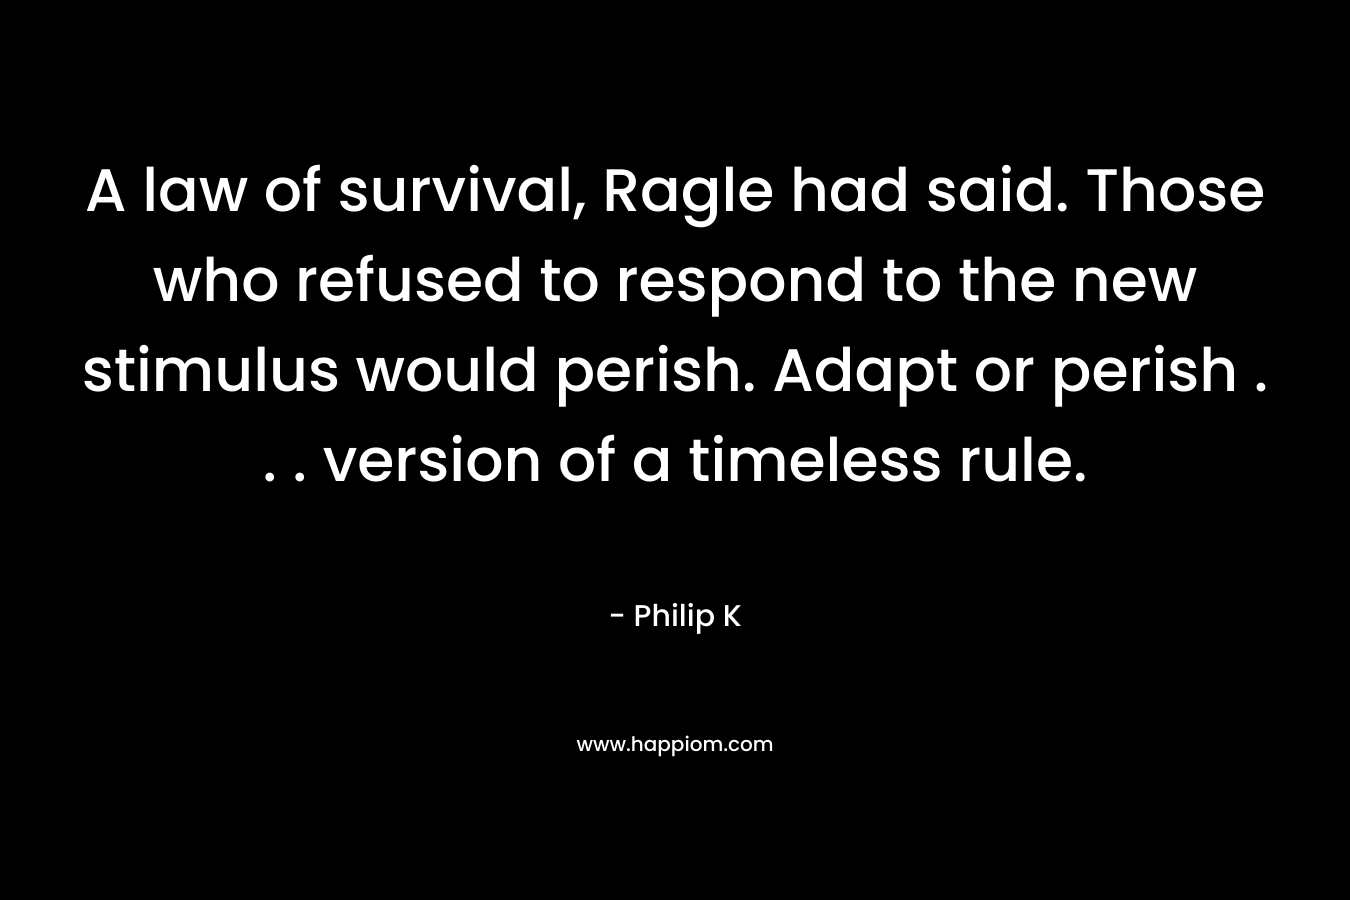 A law of survival, Ragle had said. Those who refused to respond to the new stimulus would perish. Adapt or perish . . . version of a timeless rule.